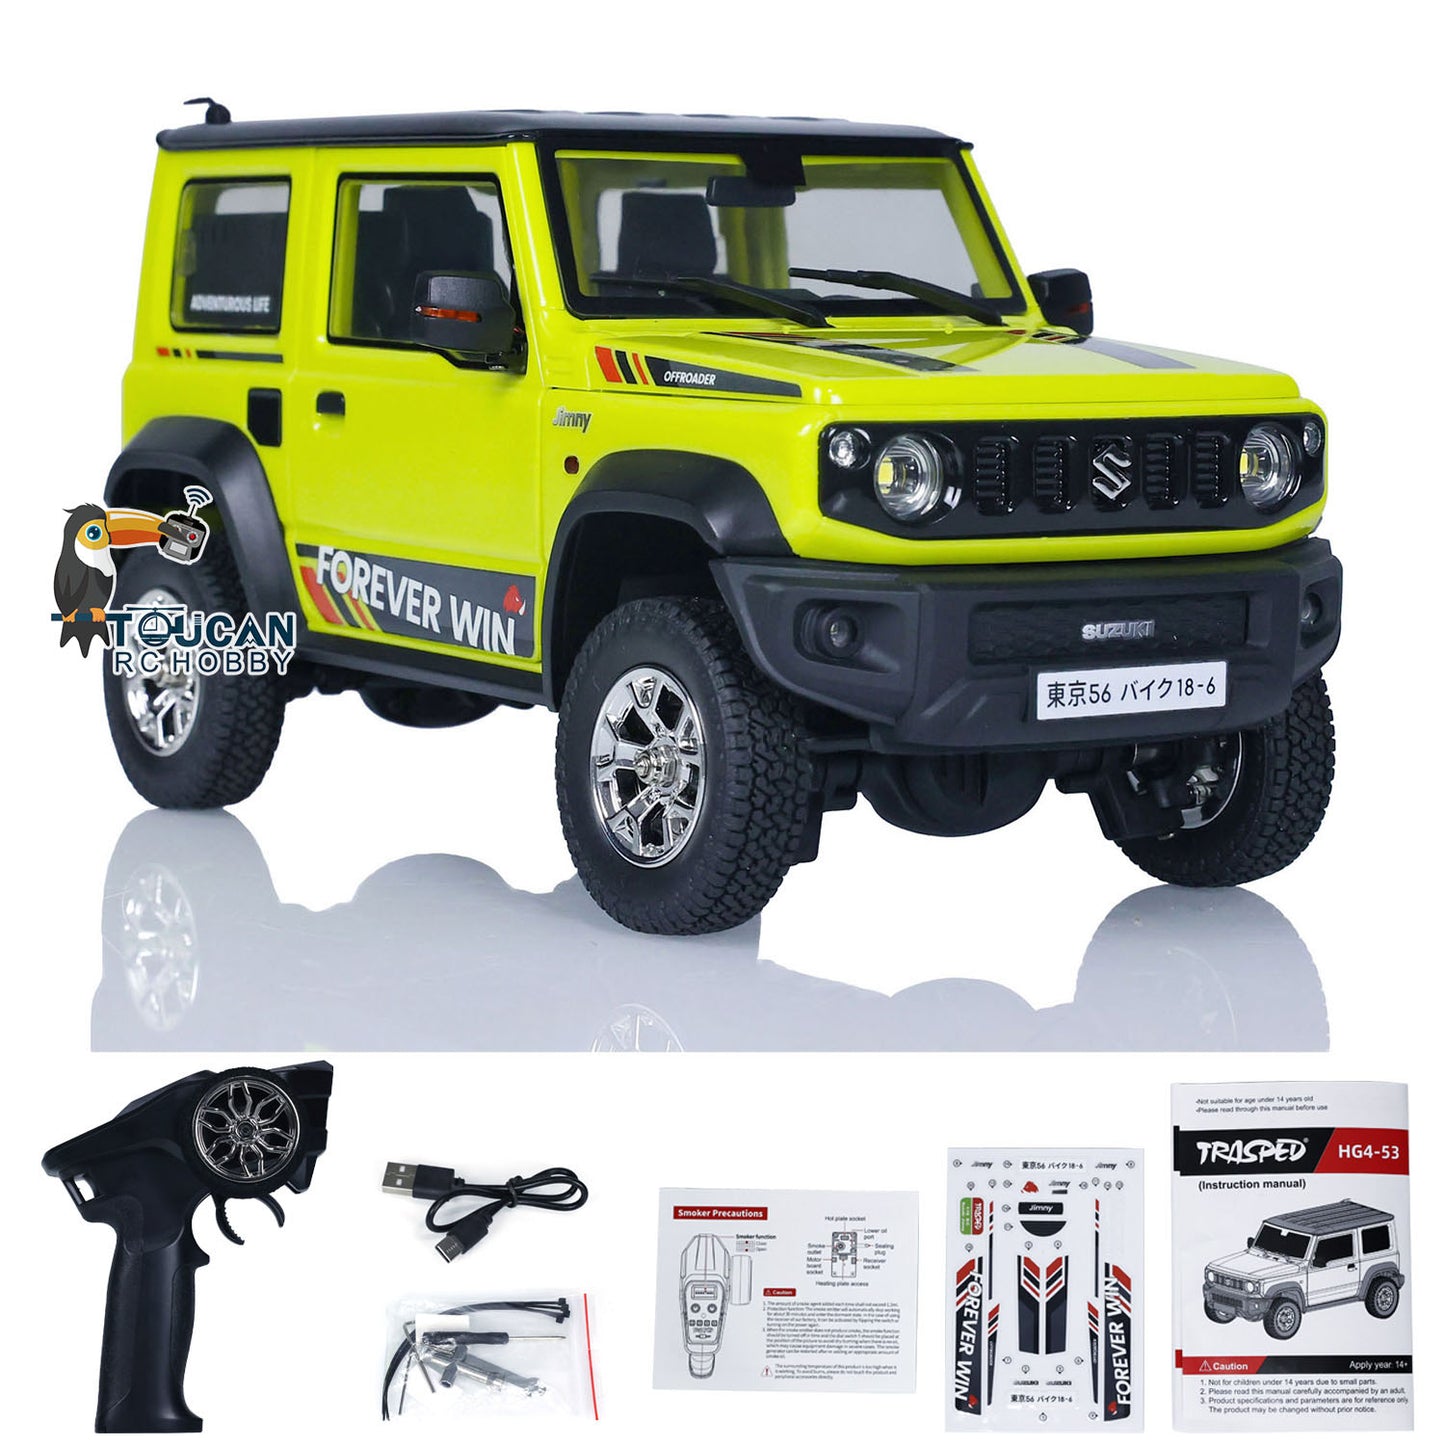 US STOCK HG 4x3 1/16 RC Rock Crawler Car Remote Control Electric Off-road Vehicles Model Sounds Painted and Assembled